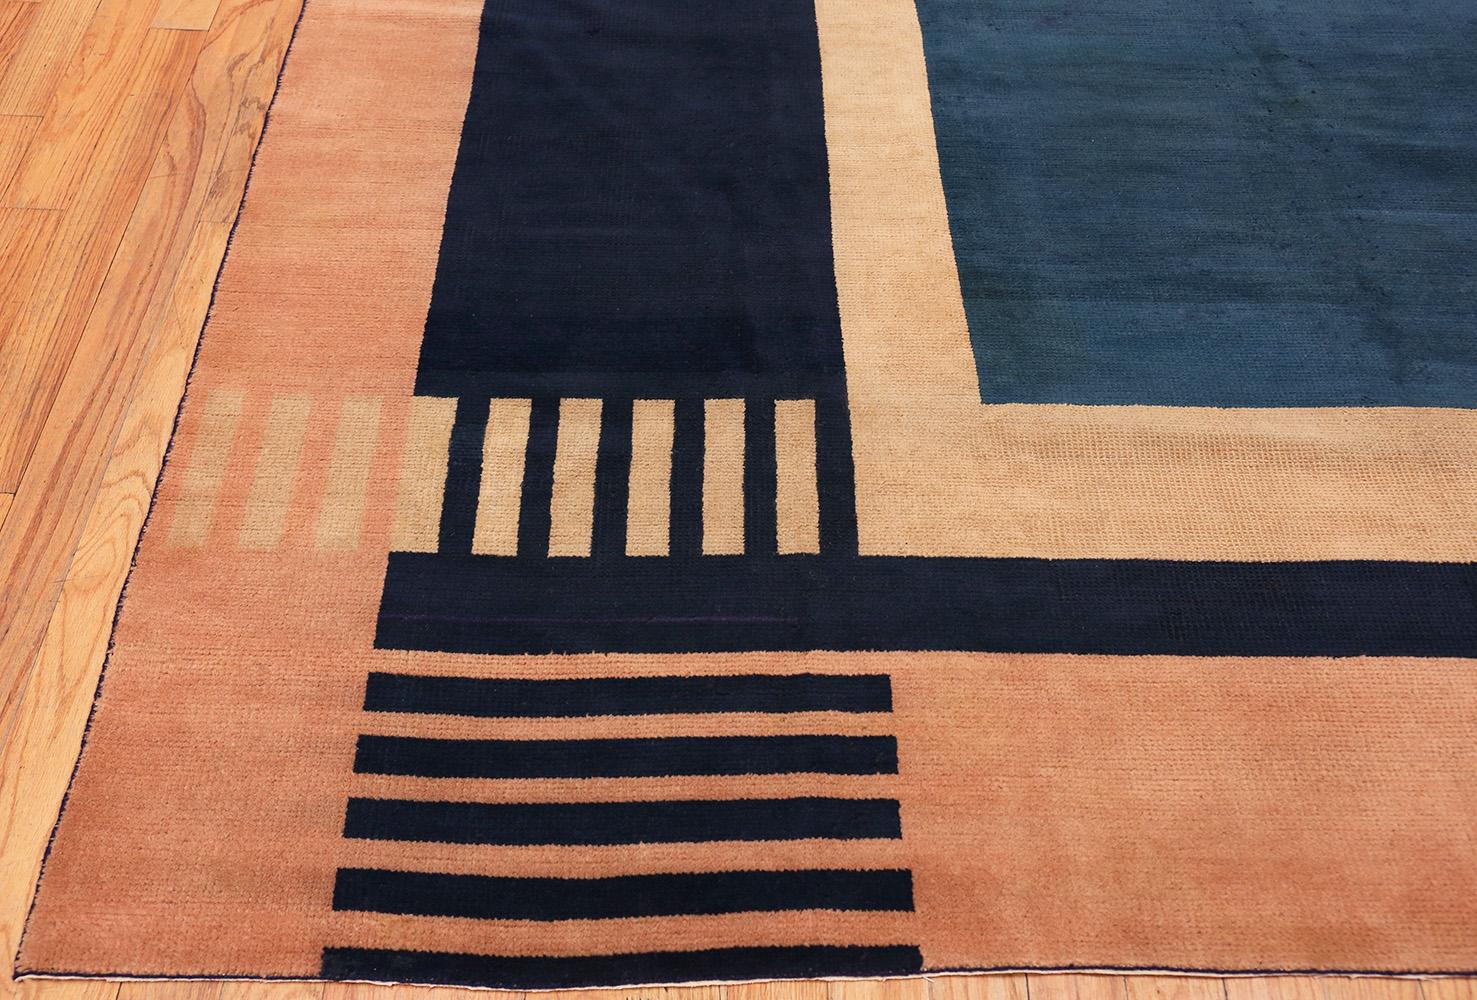 A beautifully impressive blue antique Indian Art Deco rug, Country of origin / Rug type: Antique Indian rugs, circa 1920. Size: 8 ft 8 in x 11 ft 8 in (2.64 m x 3.56 m)

The Art Deco design of this predominantly blue rug reflects the modern design